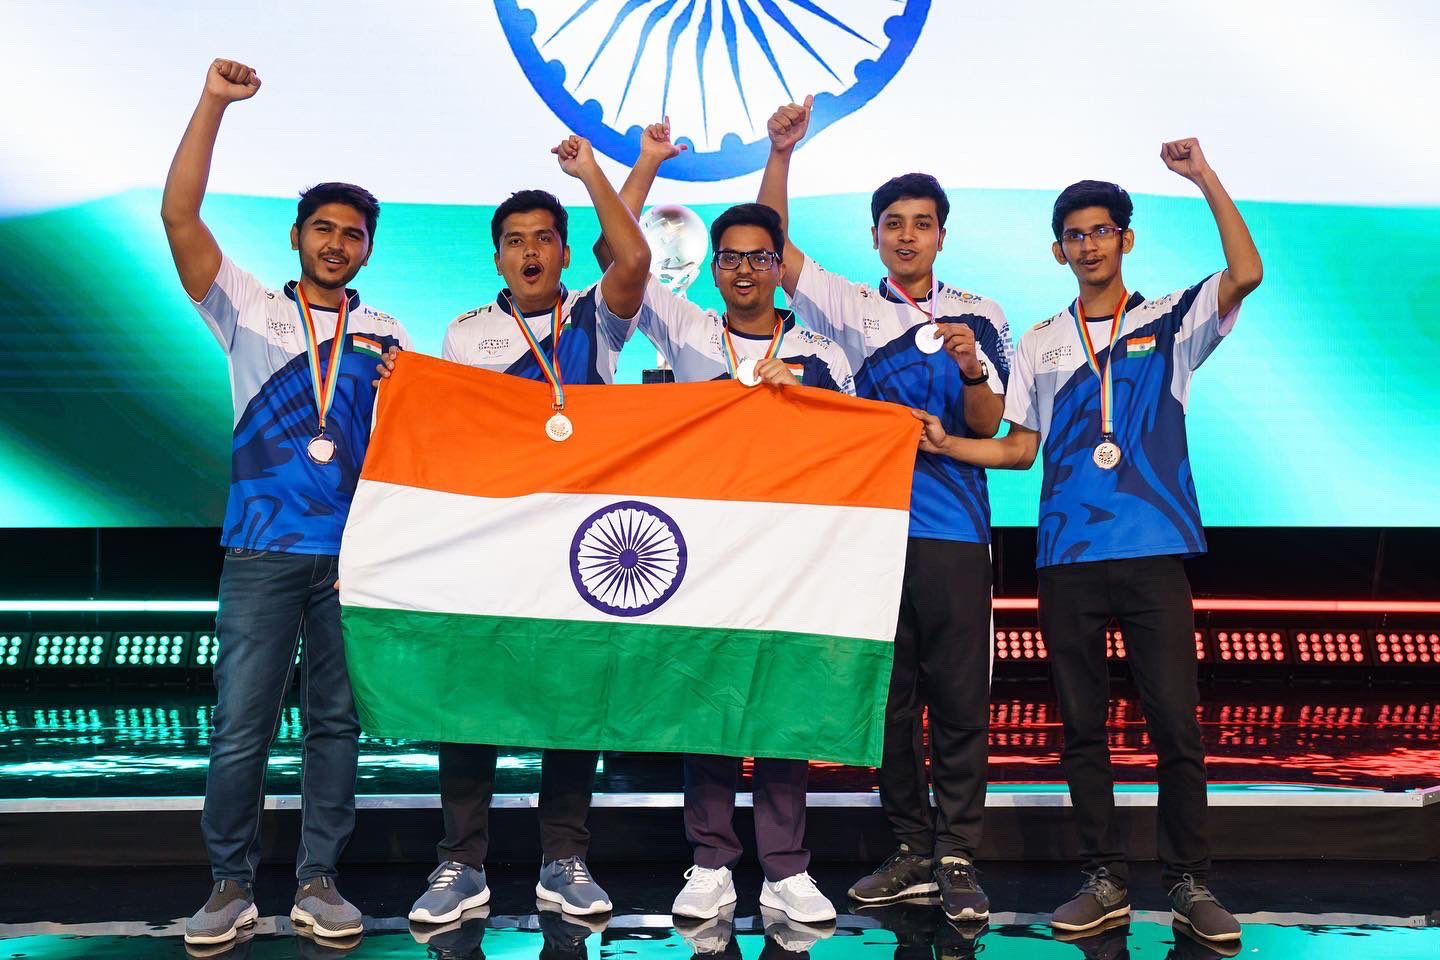 The Esports Awards 2022 All Winners Results : India Won First